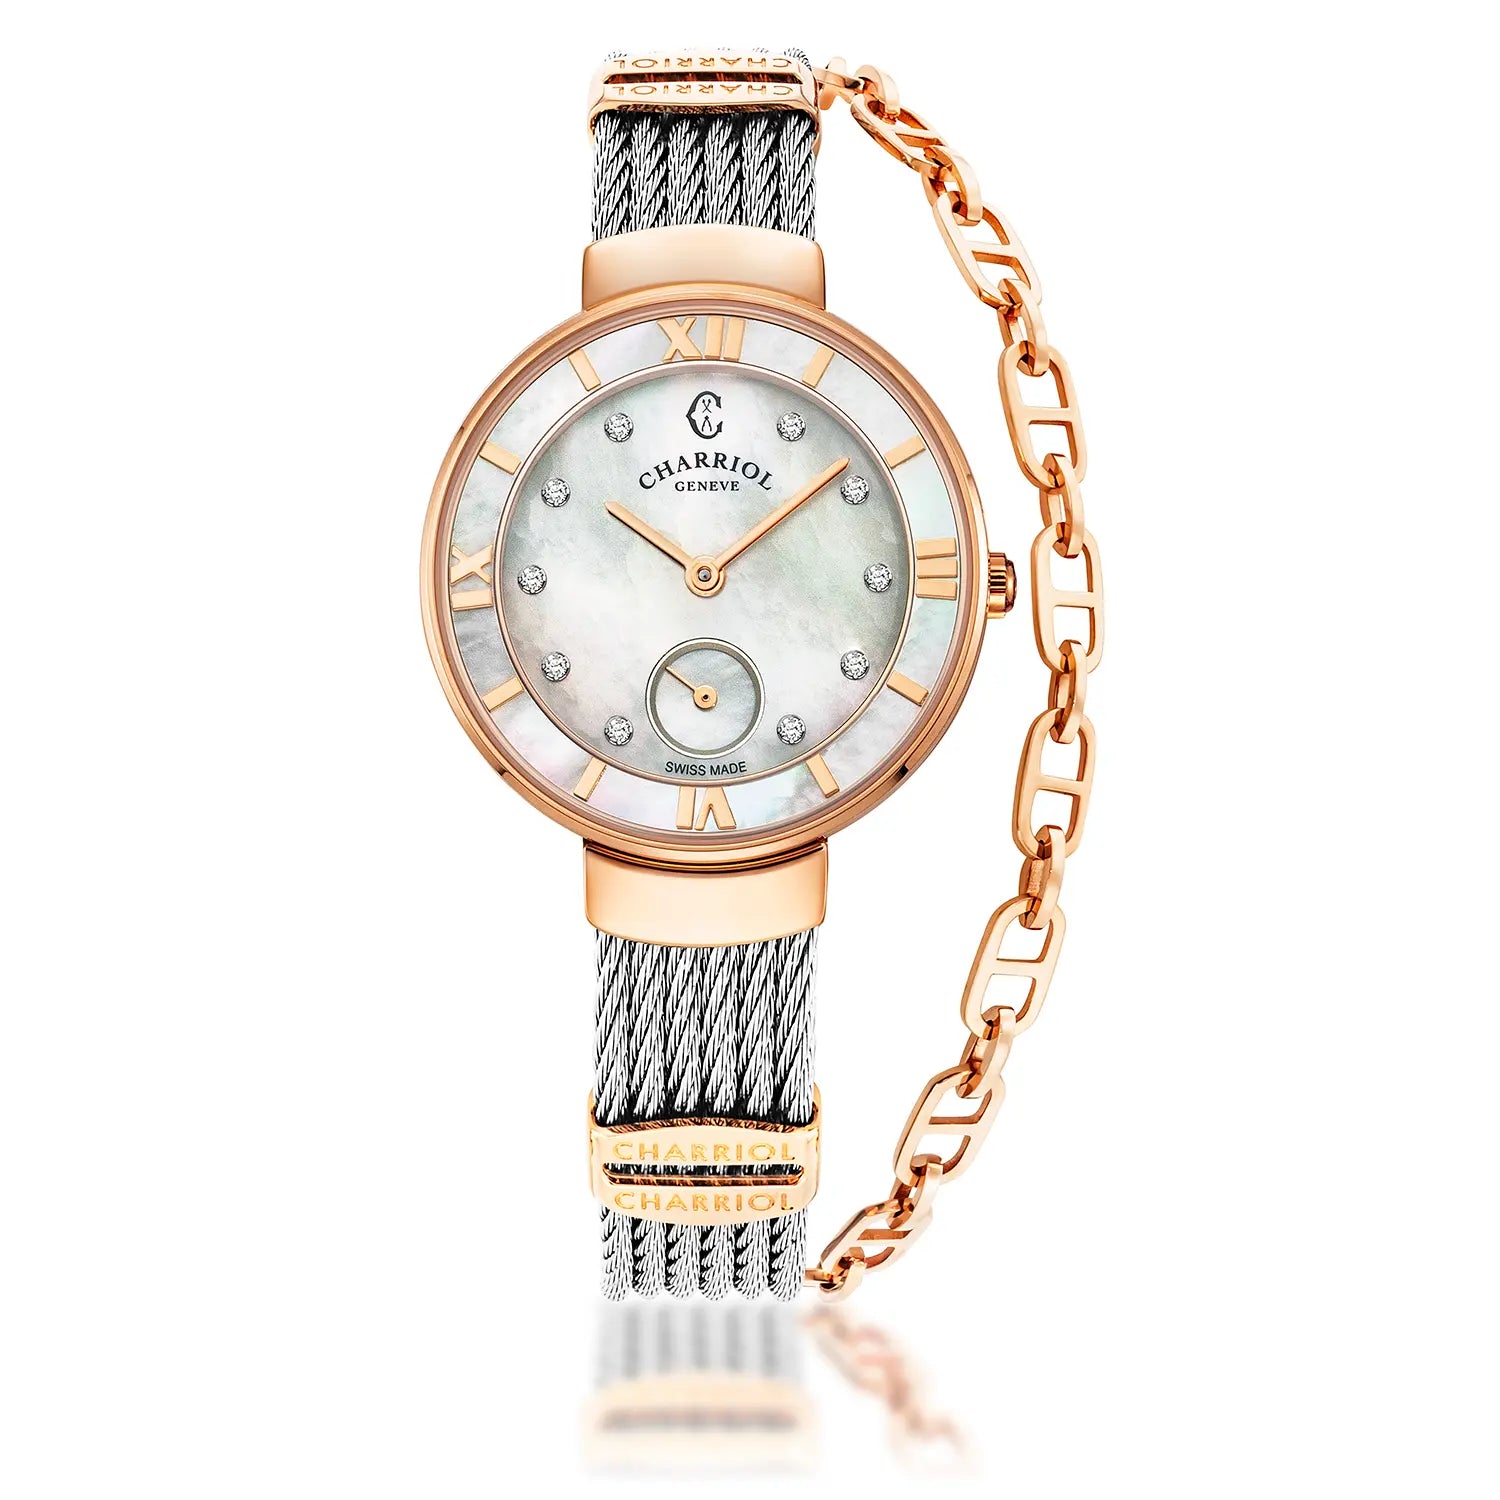 ST TROPEZ, 30MM, QUARTZ CALIBRE, MOTHER-OF-PEARL WITH 10 DIAMONDS DIAL, MOTHER-OF-PEARL BEZEL, STEEL CABLE BRACELET - Charriol Geneve -  Watch